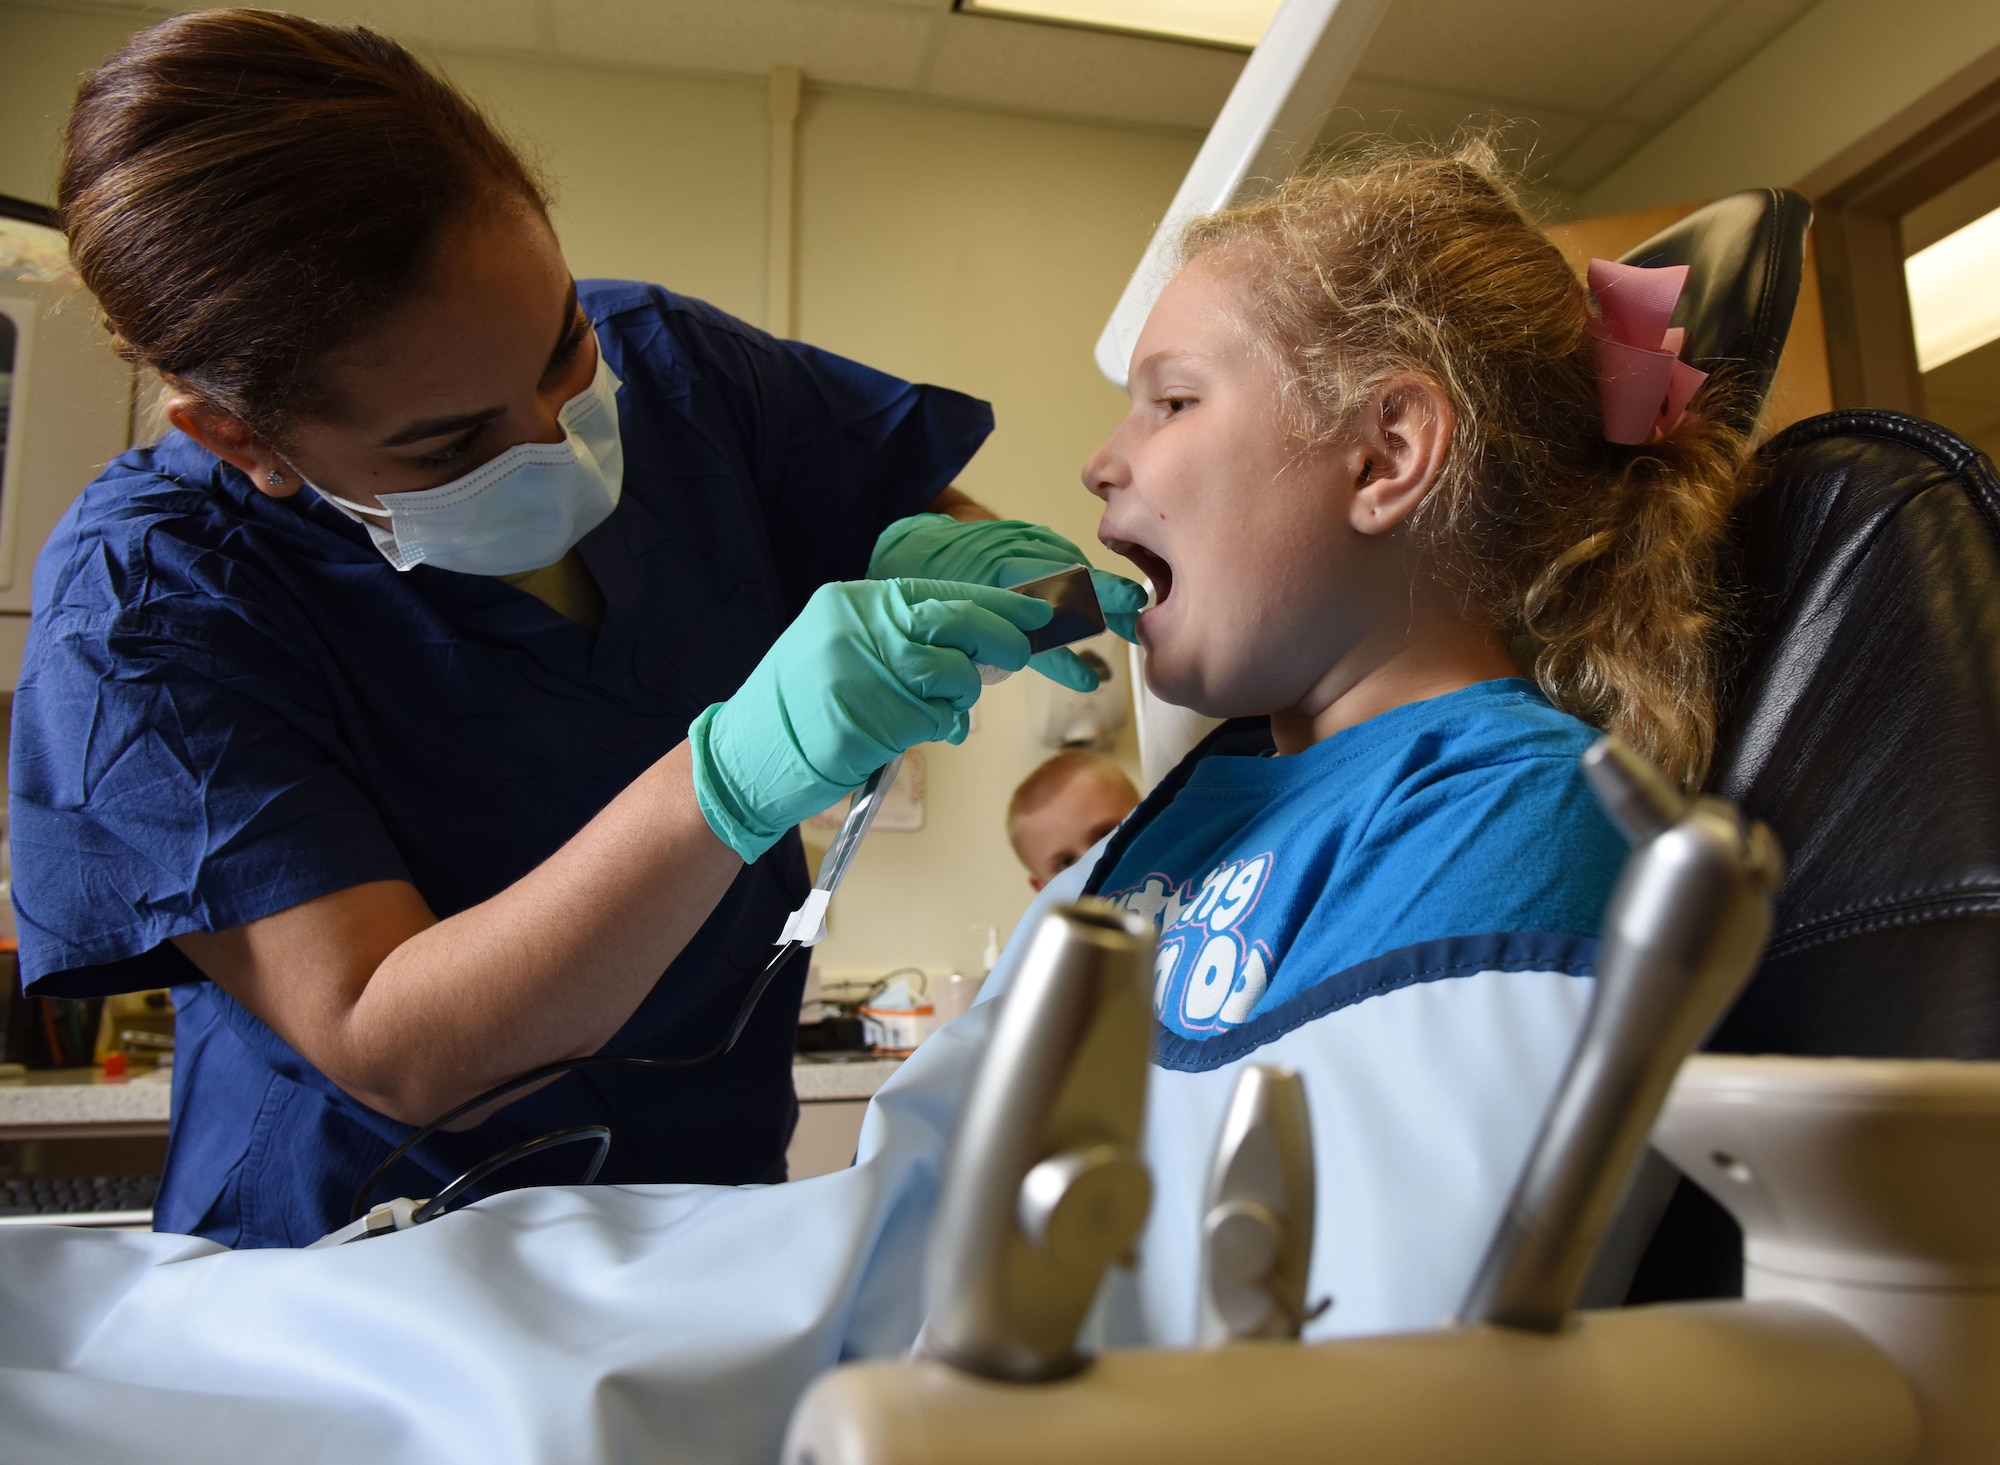 Senior Airman Caitlyn Hollowell, 81st Dental Squadron dental technician, prepares to take an x-ray on Katelyn Landolt, daughter of Lt. Col. Barbara Hoeben, 81st Diagnostic and Therapeutic Squadron clinical pharmacist, March 1, 2017, on Keesler Air Force Base, Miss.